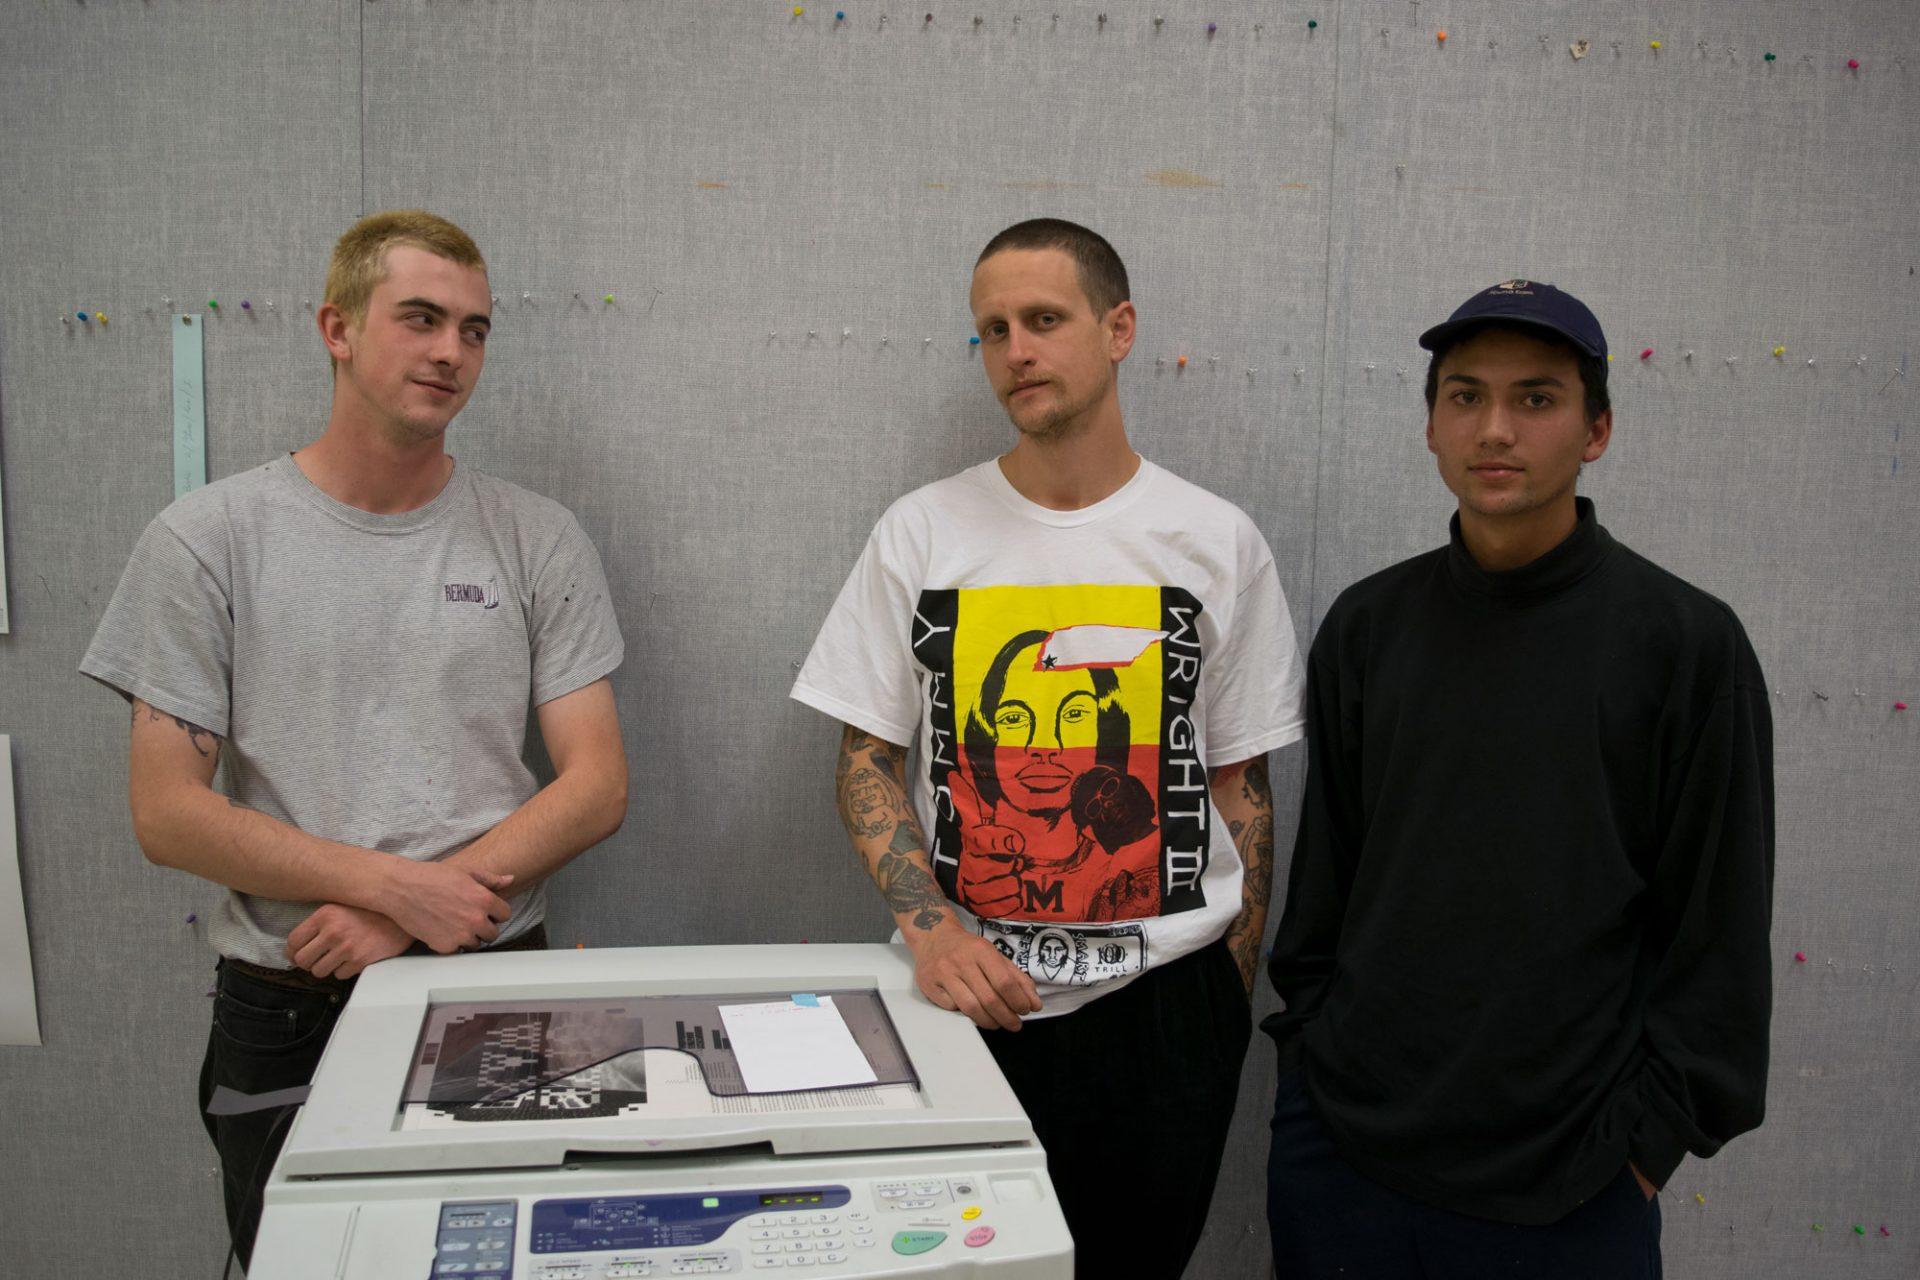 David Vertrees (left), Jason Wright, and Julien Passajou pose in front of the risograph printer in Wey Hall.